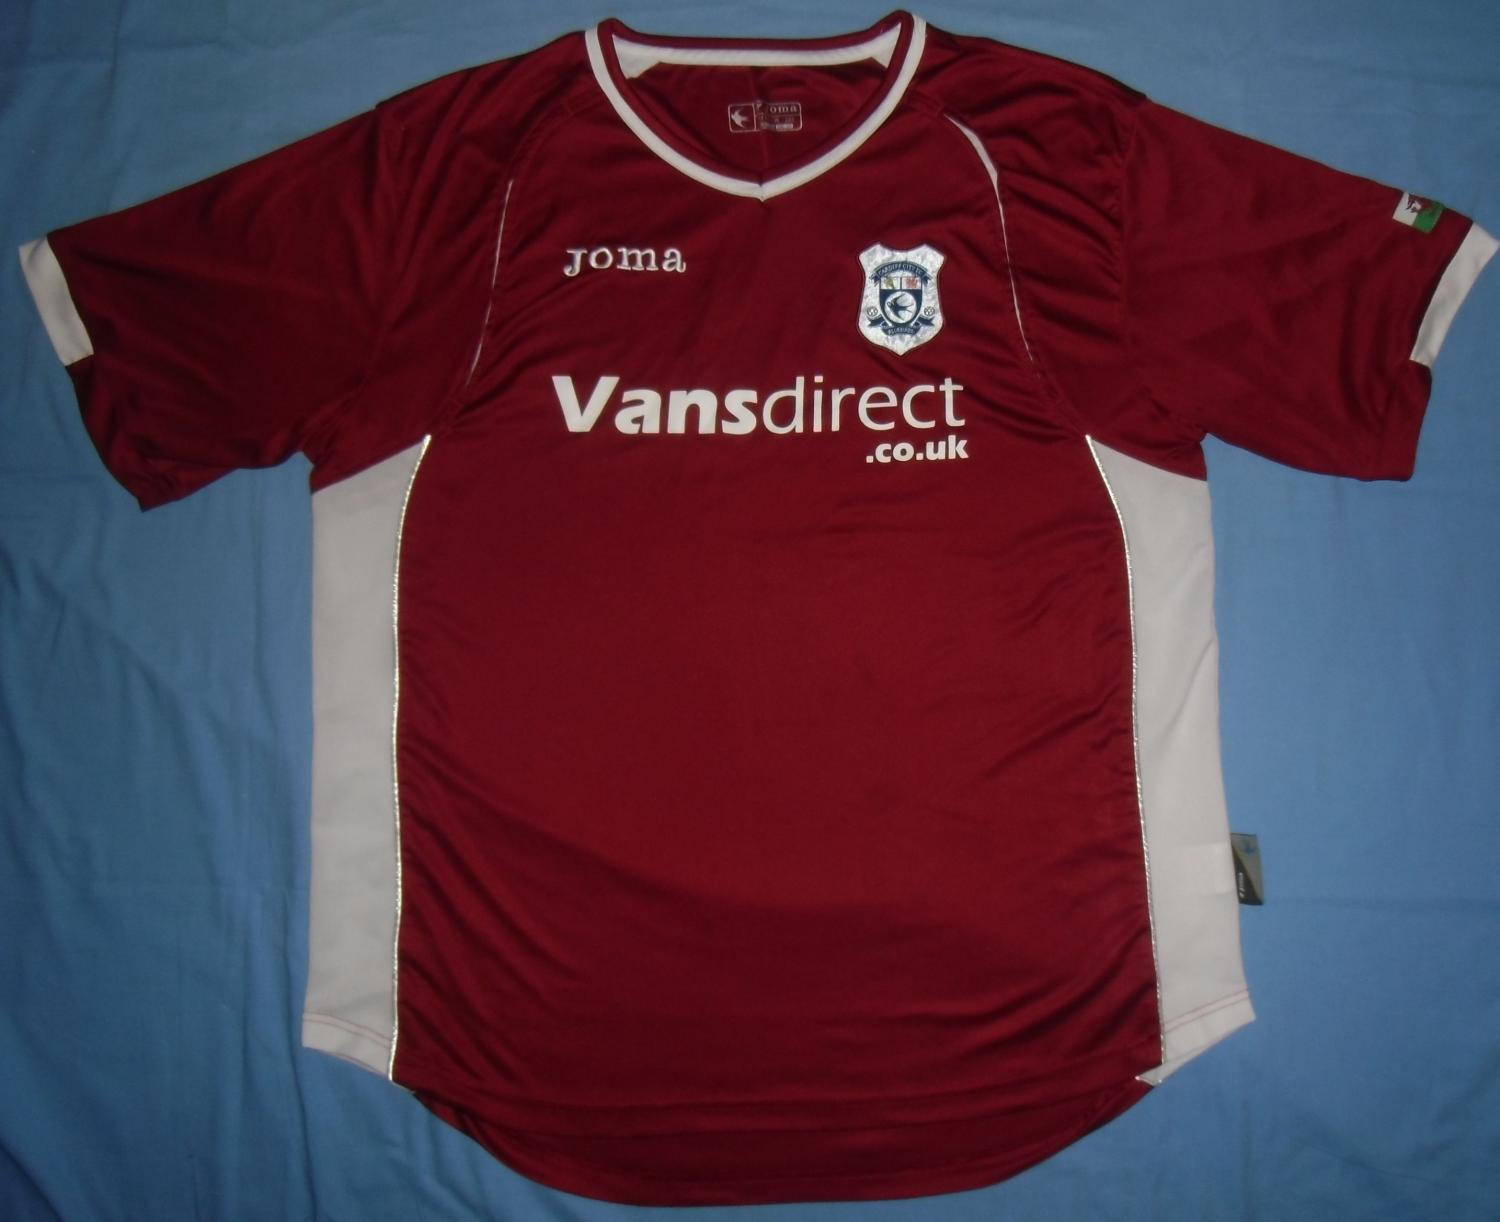 Cardiff City Away football shirt 2008 - 2009. Sponsored by Vans Direct